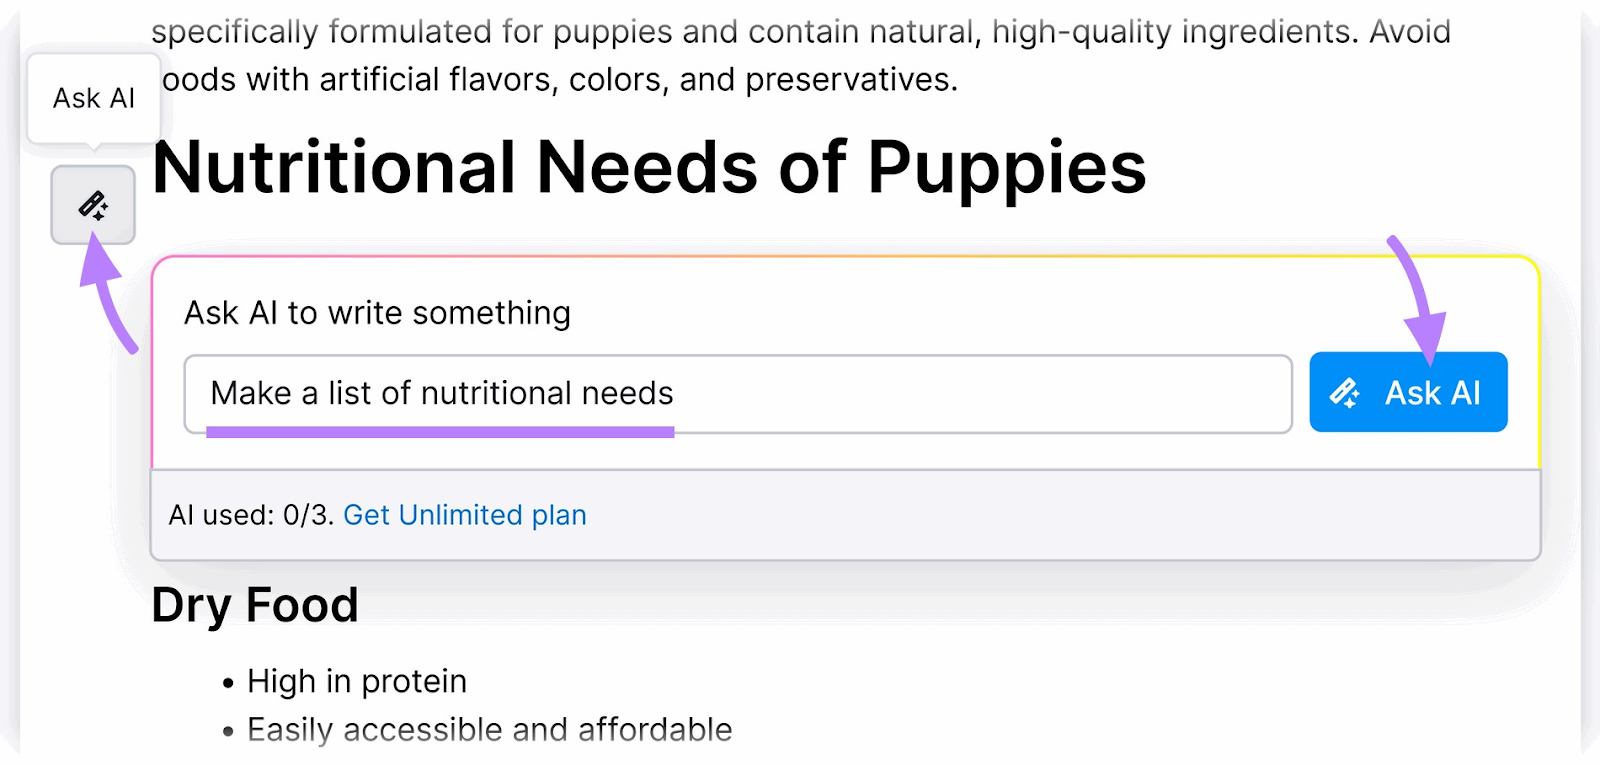 "Make a list of nutritional needs" prompt in “Ask AI”